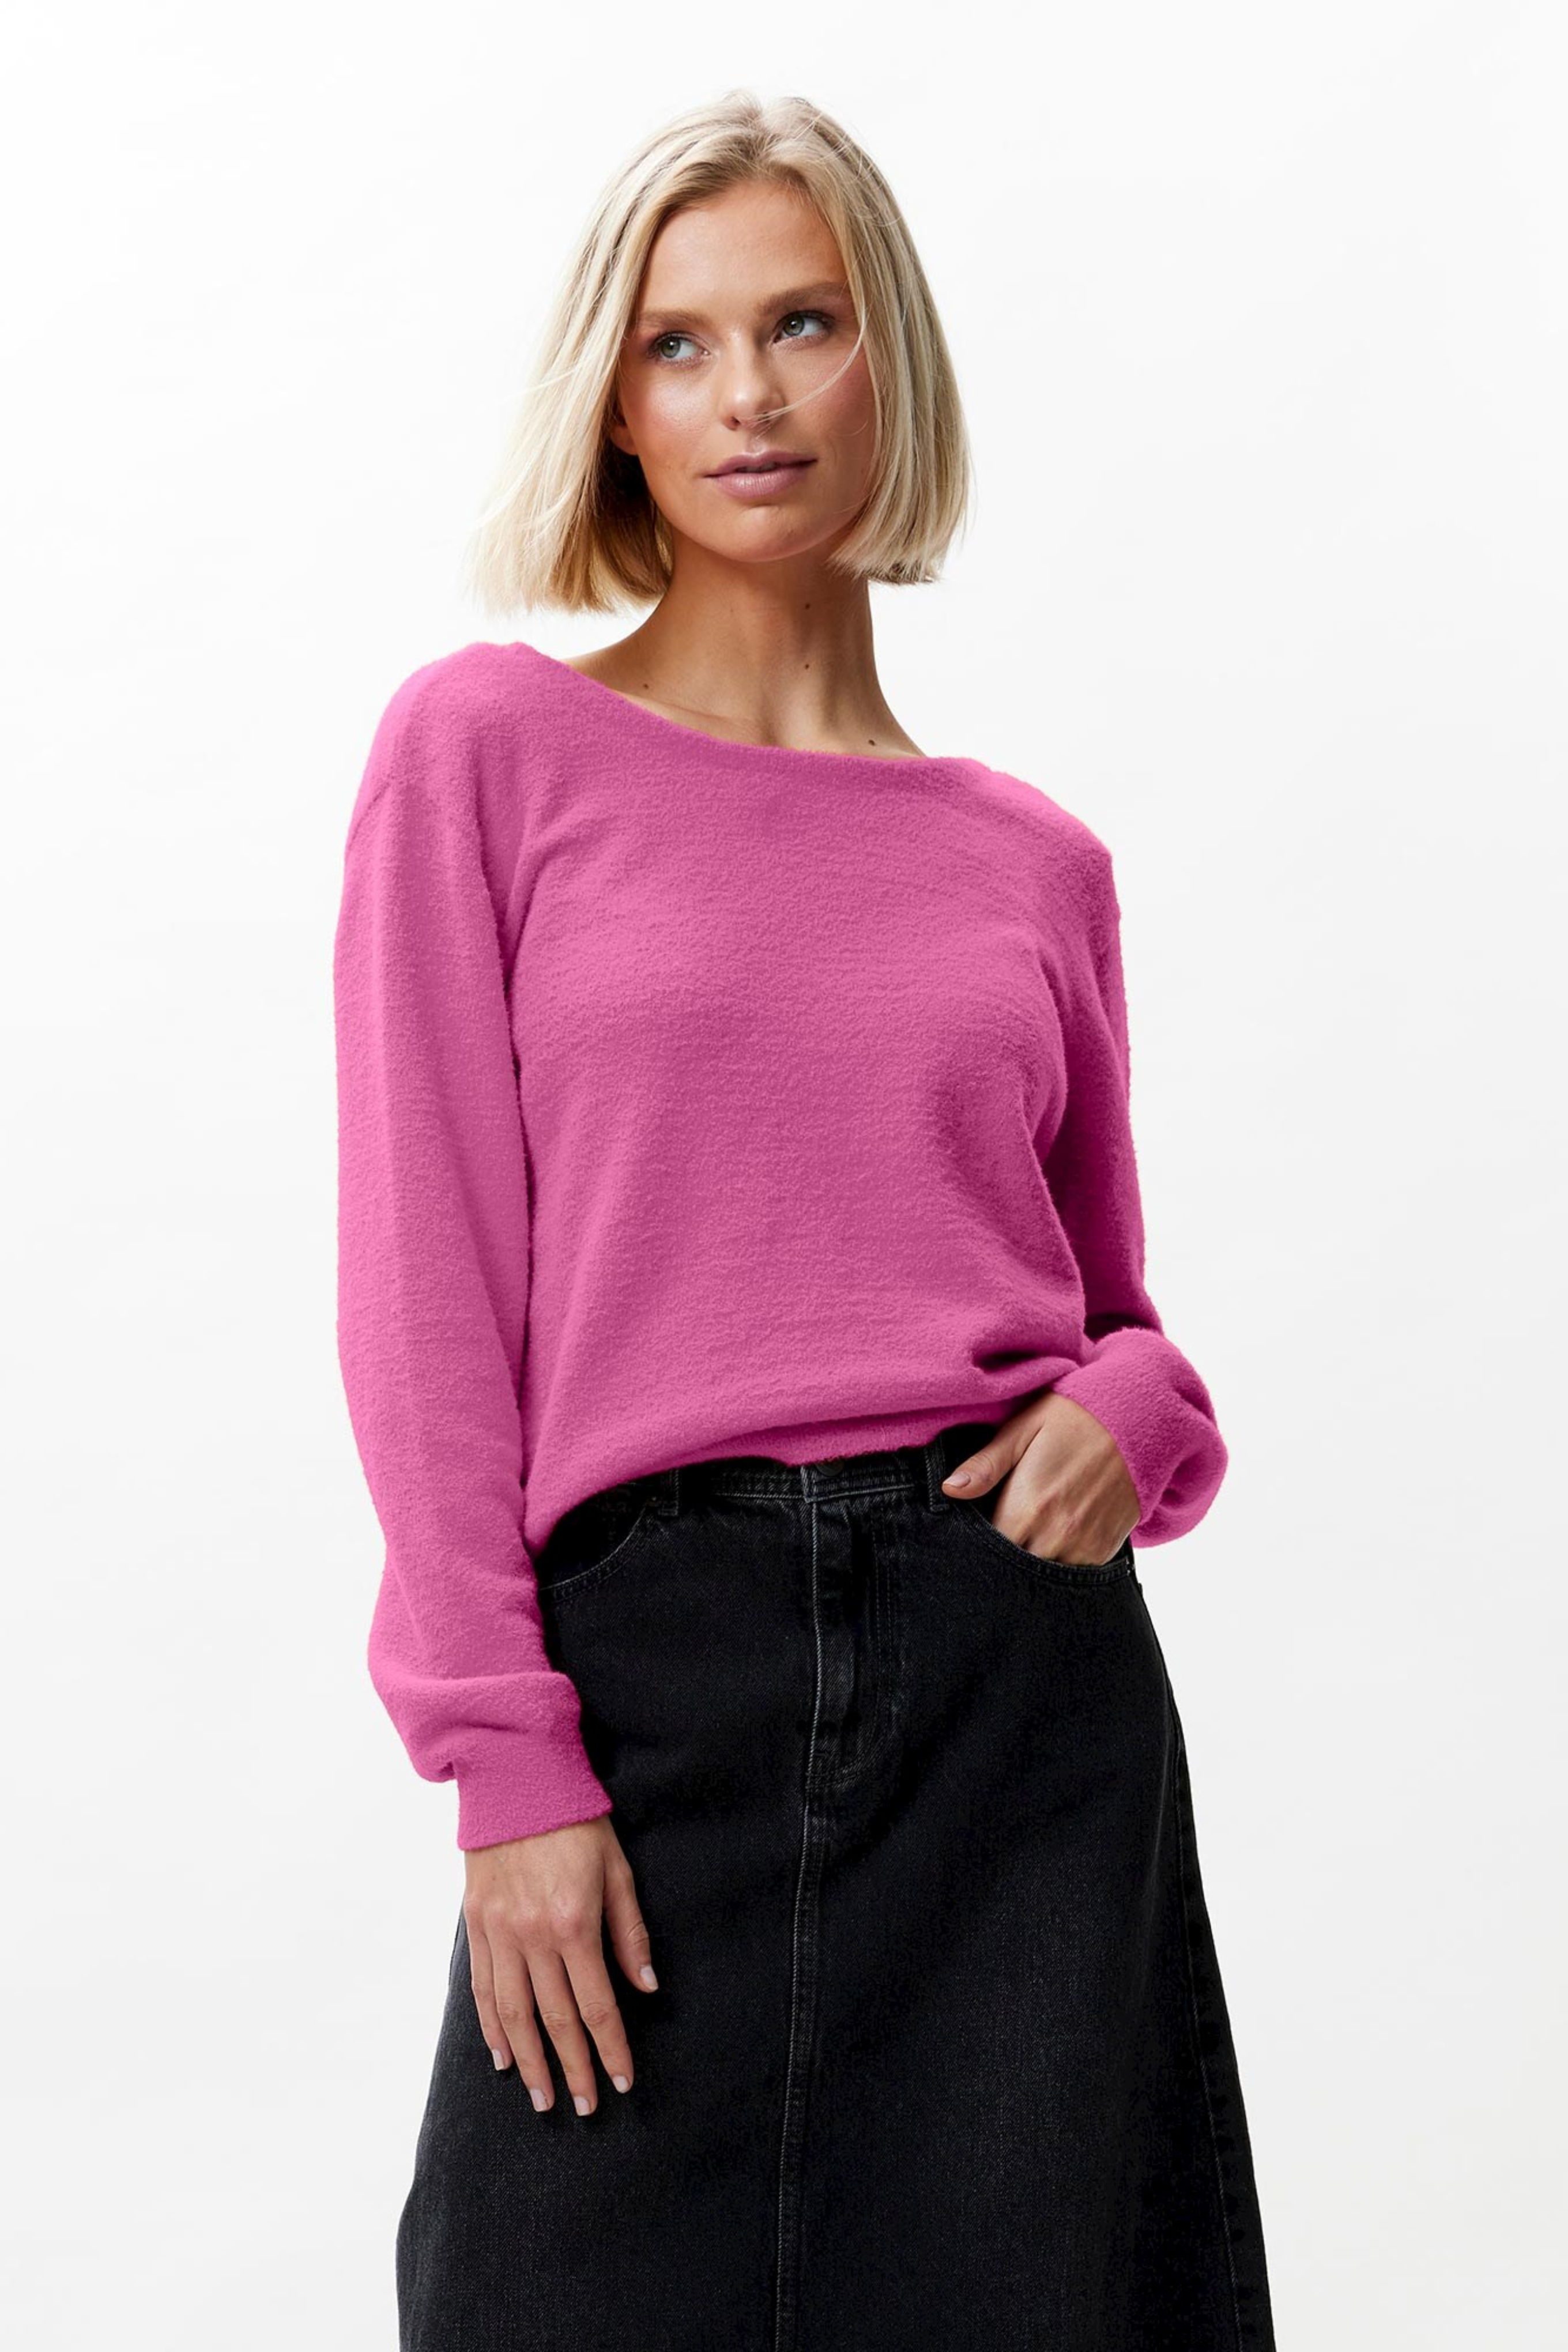 KN LILY SWEATER - SUPER PINK